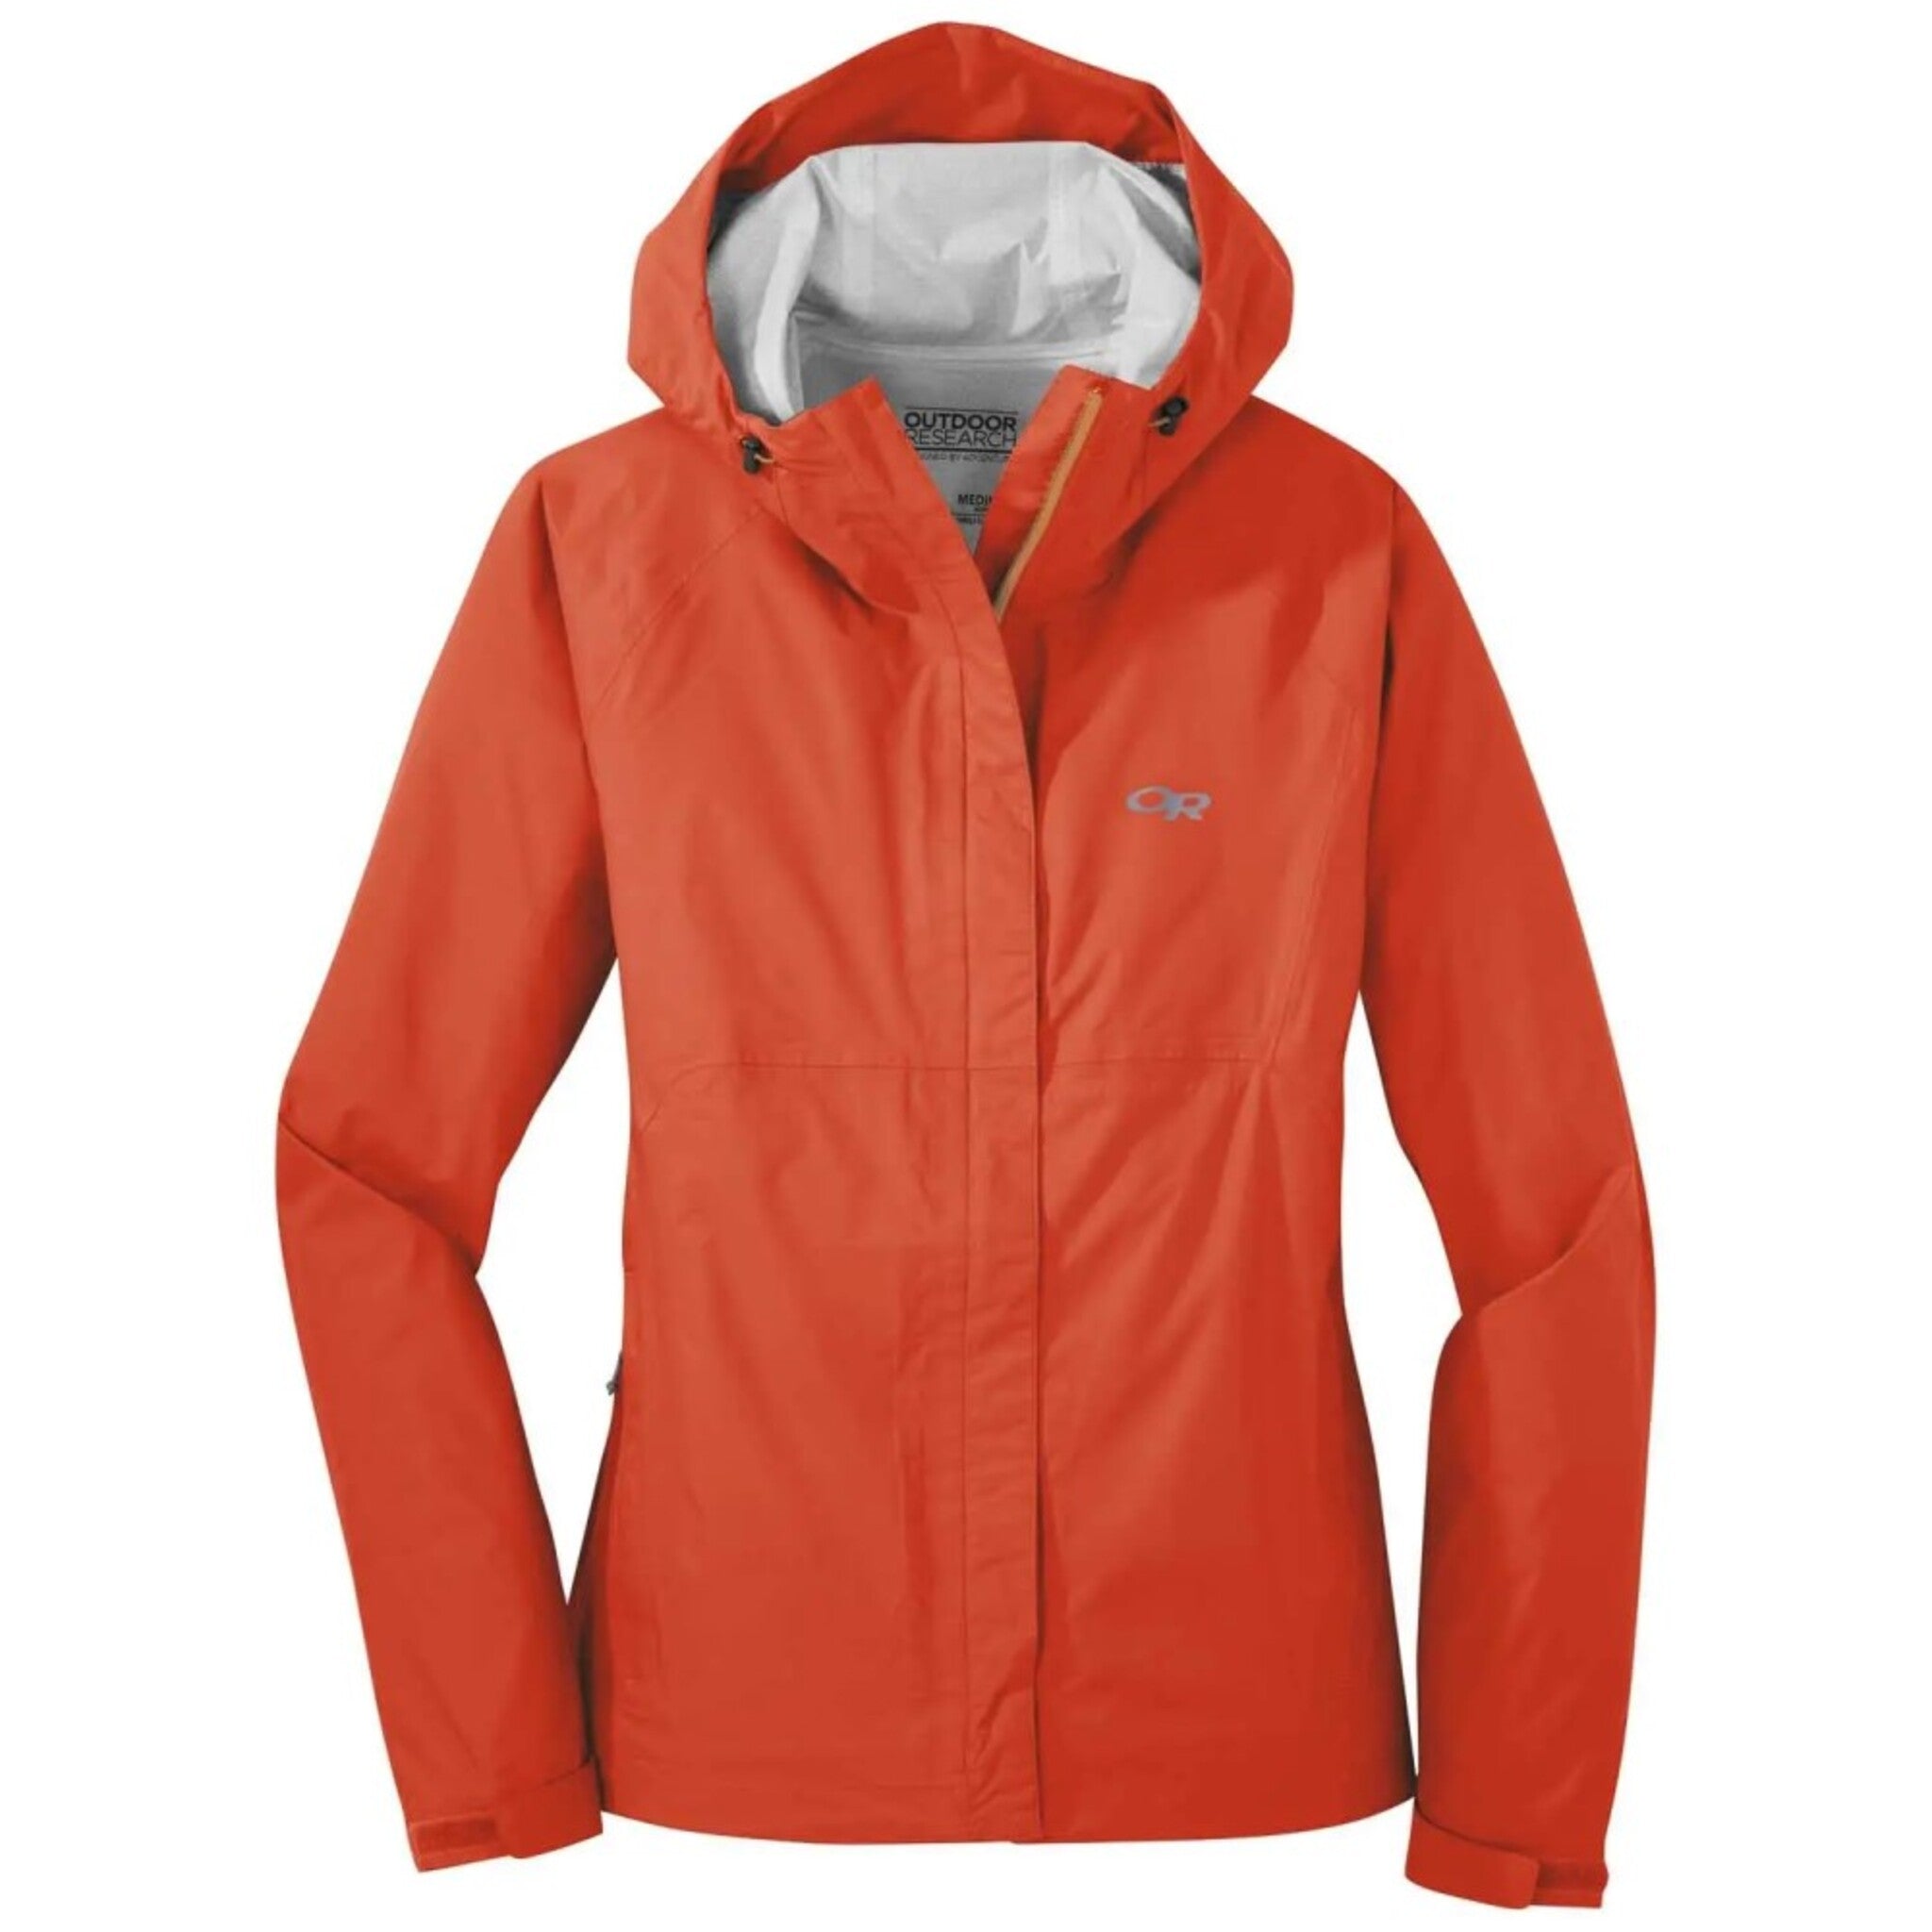 【Outdoor Research】APOLLO JACKET 女防水防風透氣連帽外套 紅 269185-0445